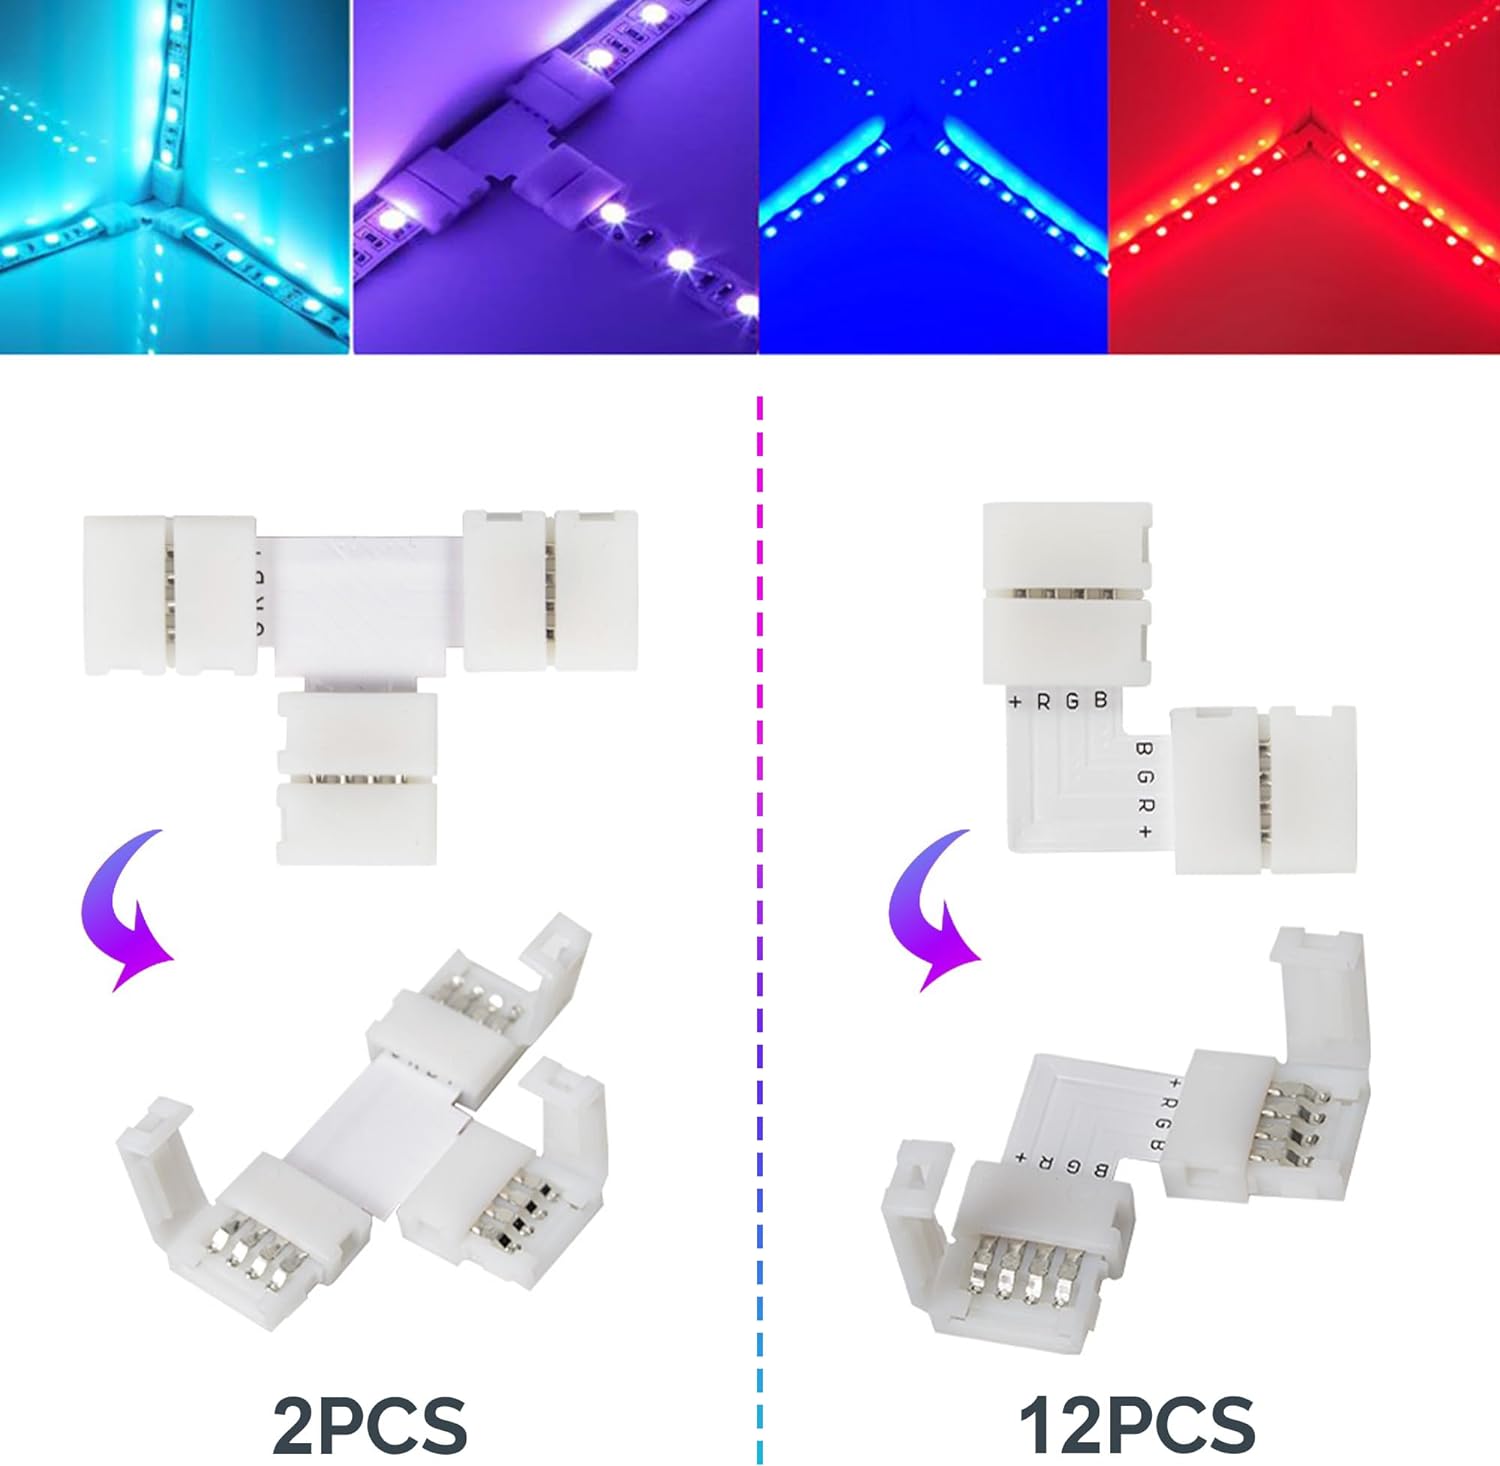 FUMENTON LED Strip Connector Kit for 5050 10mm 4Pin,Includes 8 Types of Solderless LED Strip Accessories,Provides Most Parts for DIY